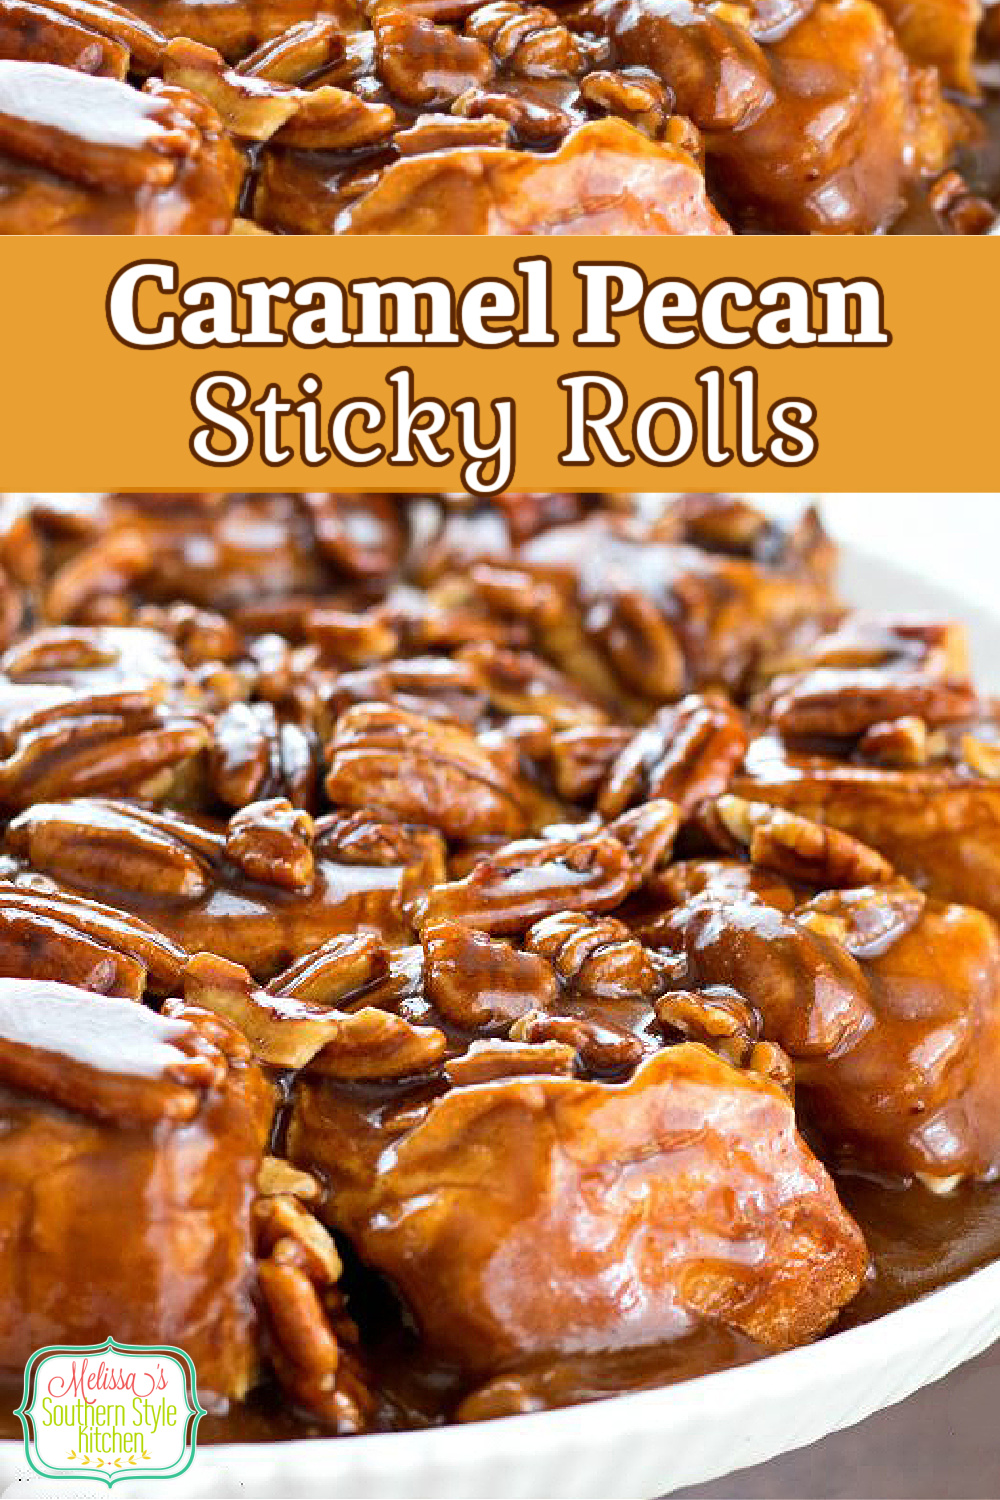 No bread making is required to make these irresistible Caramel Pecan Sticky Rolls #stickyrolls #caramel #caramelpecan #pecans #sweetrolls #caramelrolls #sweet #desserts #dessertfoodrecipes #southernfood #southernrecipes #bread #rolls #brunch #breakfast